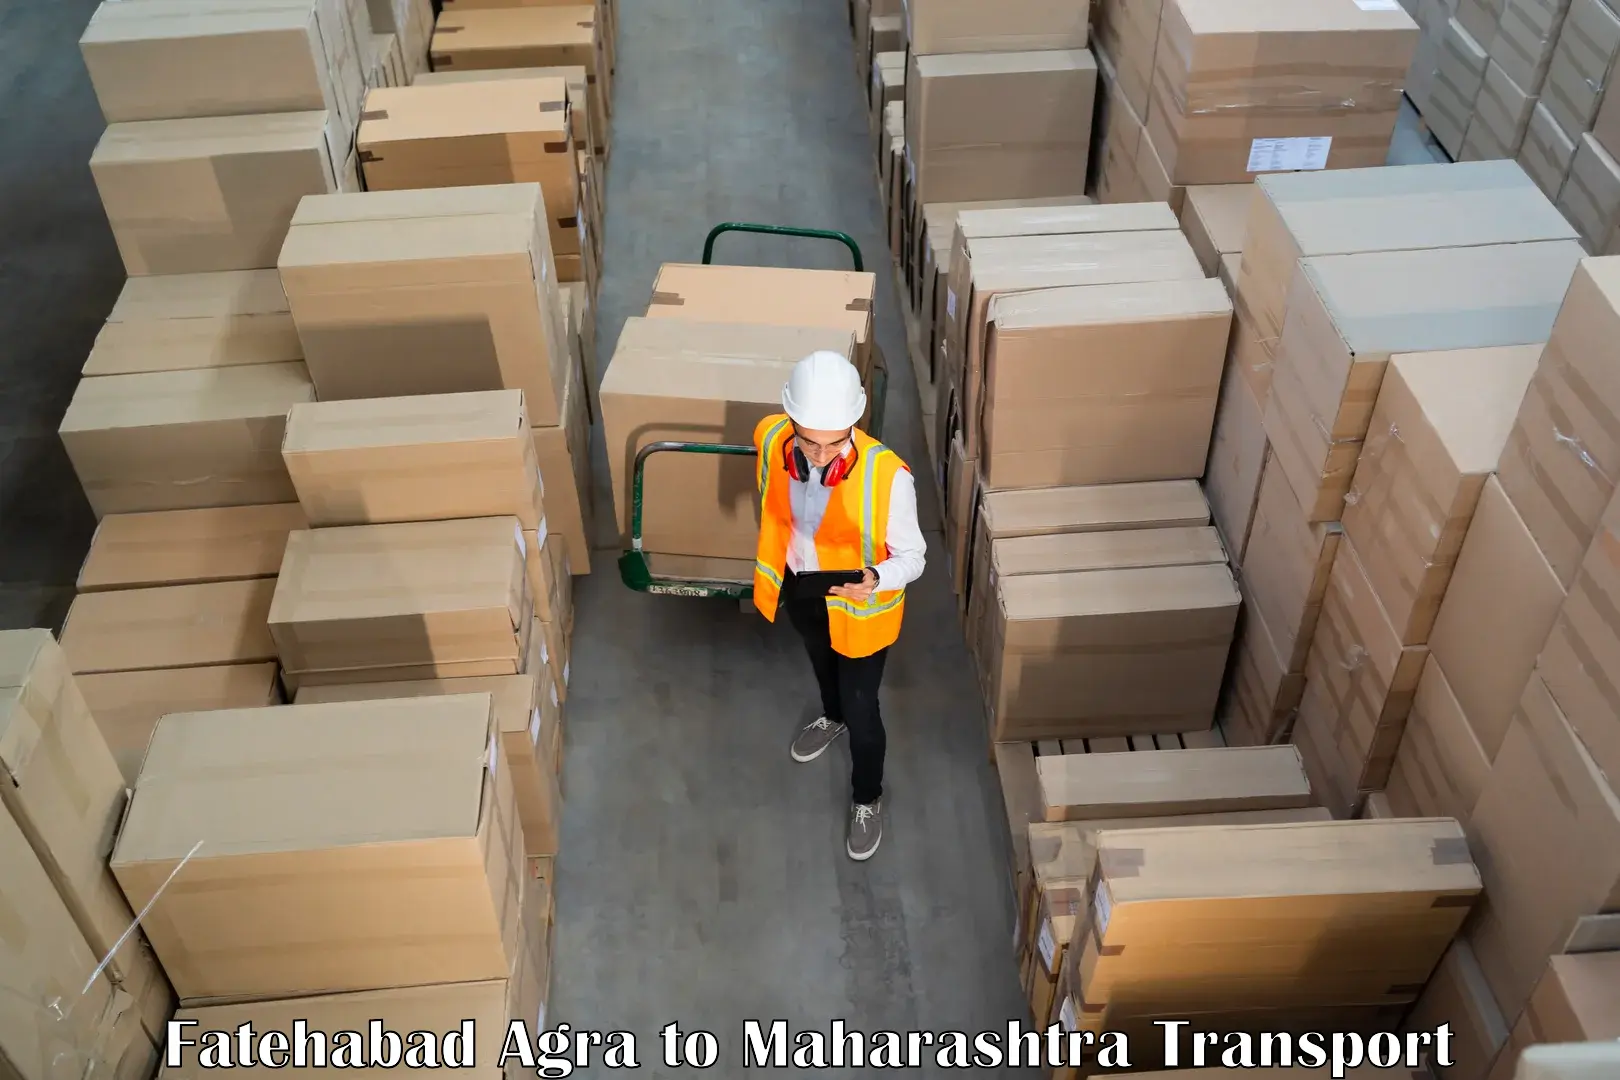 Daily parcel service transport Fatehabad Agra to Tirora